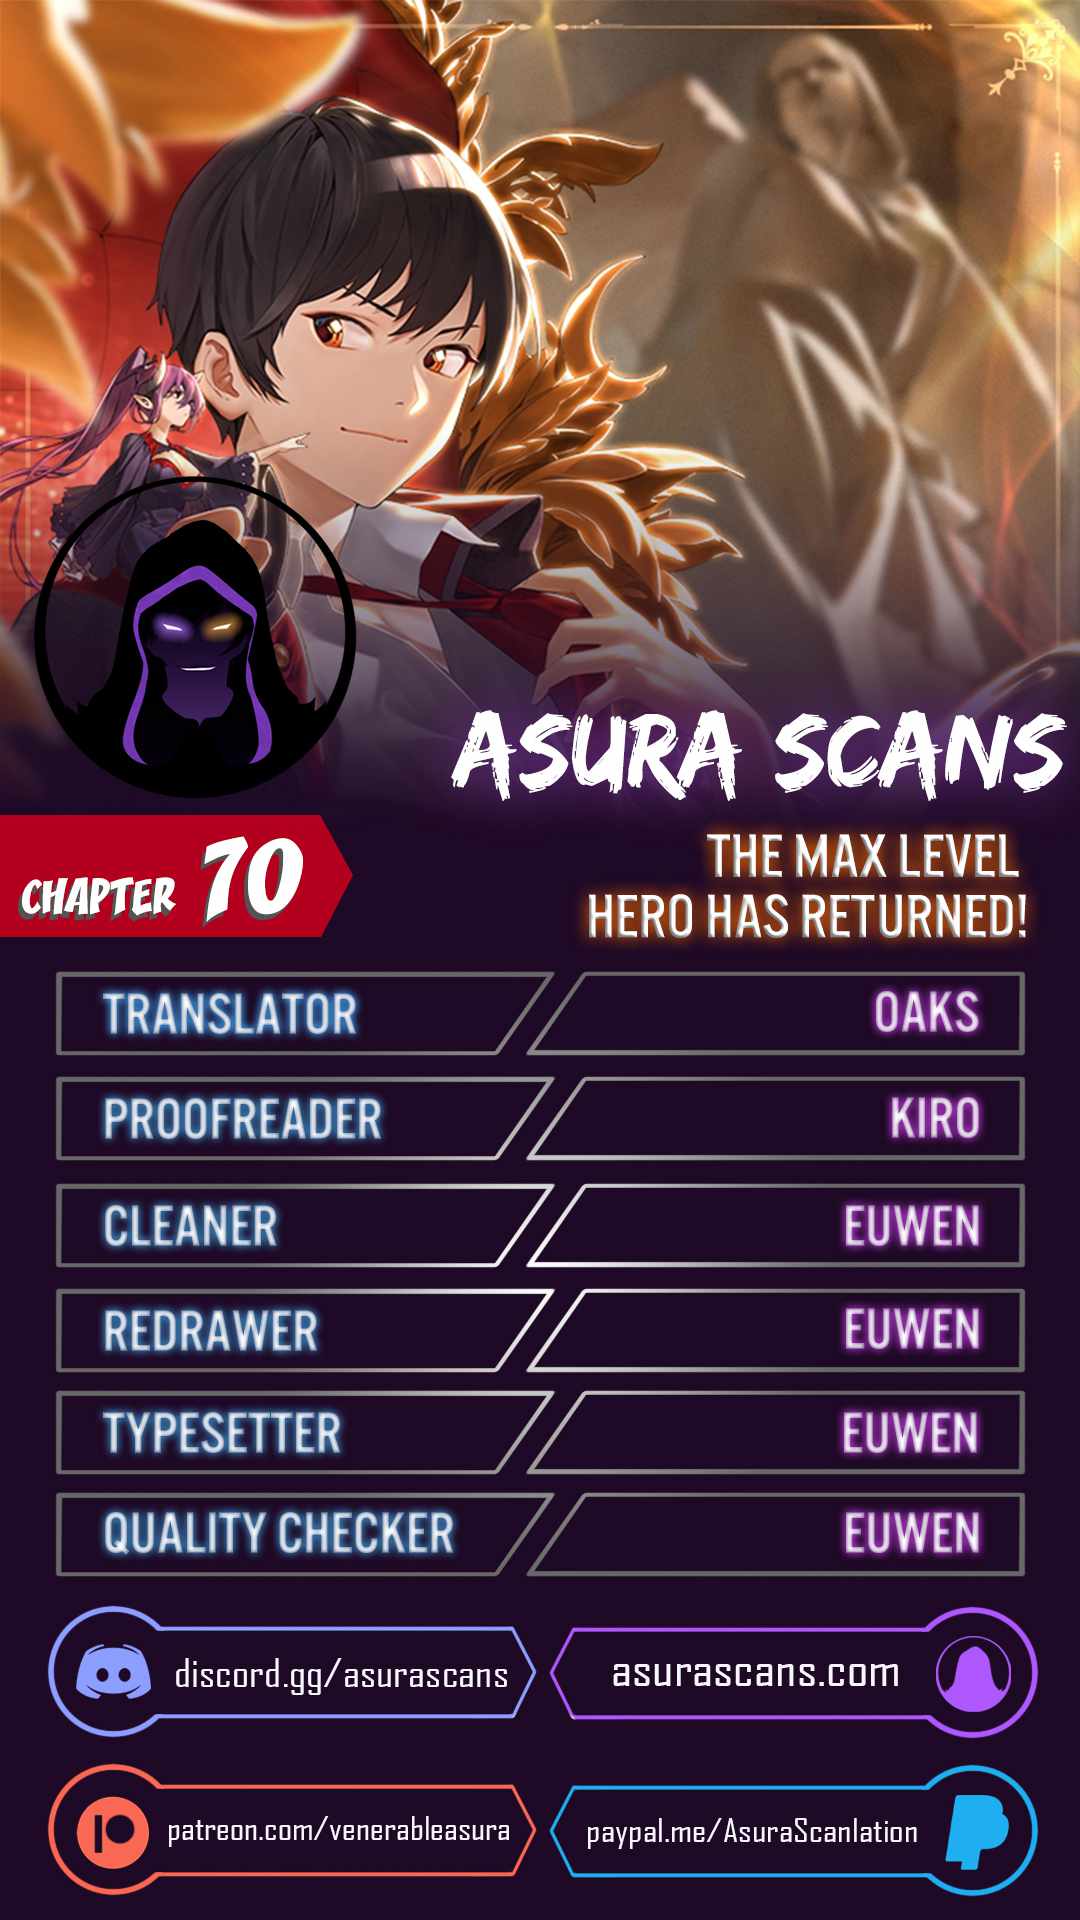 The MAX leveled hero will return! Chapter 70